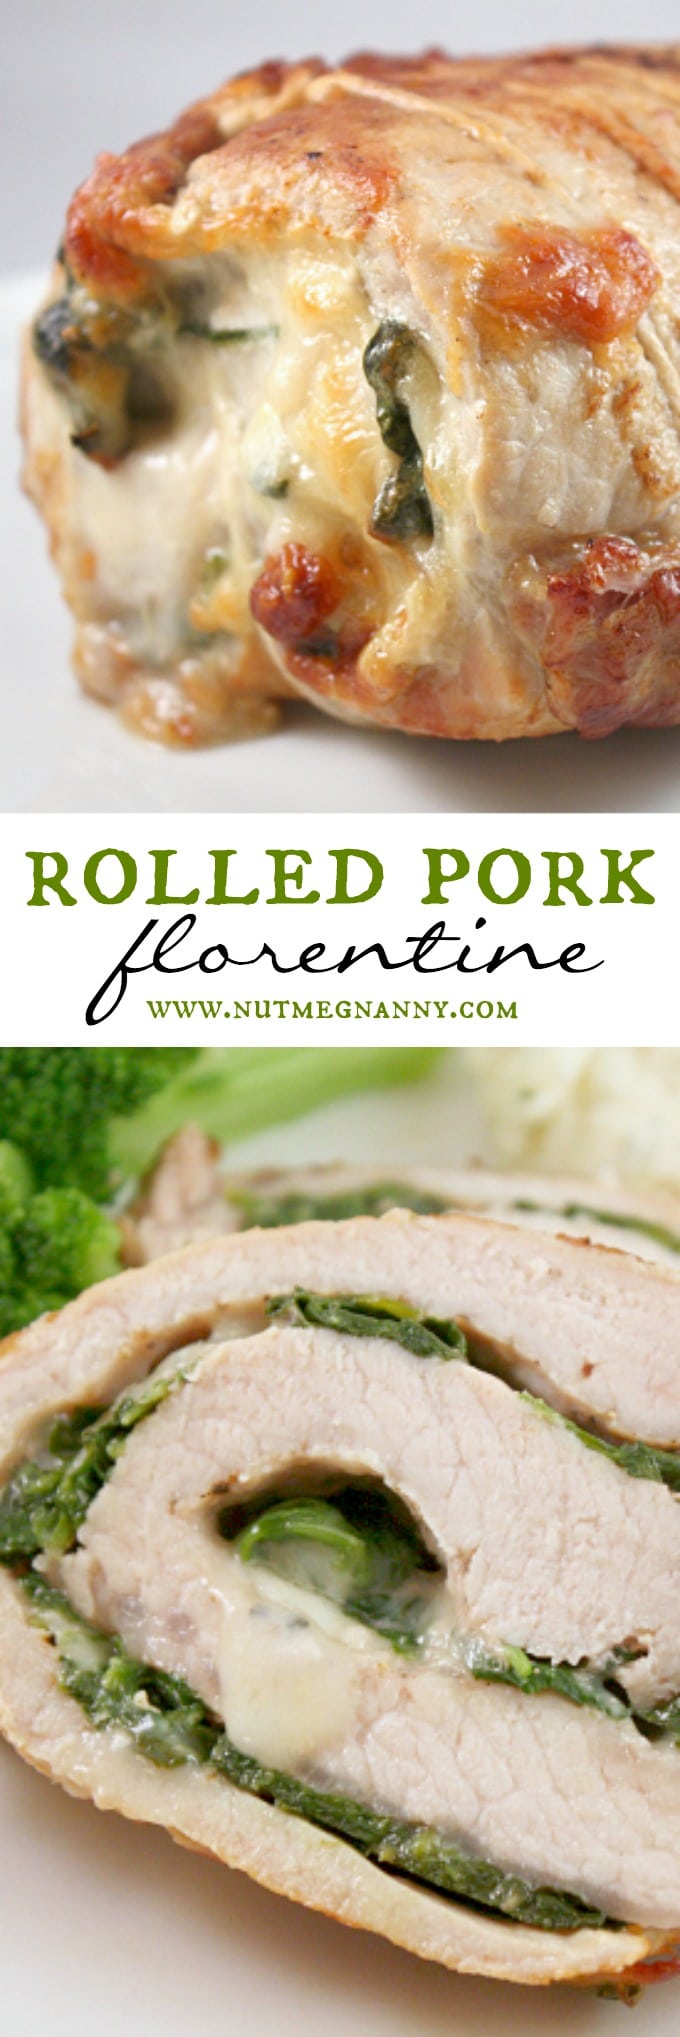 This rolled pork florentine might look hard to pull off but it's super simple. Fresh pork is stuffed with provolone cheese and sautéed spinach, what's not to love?